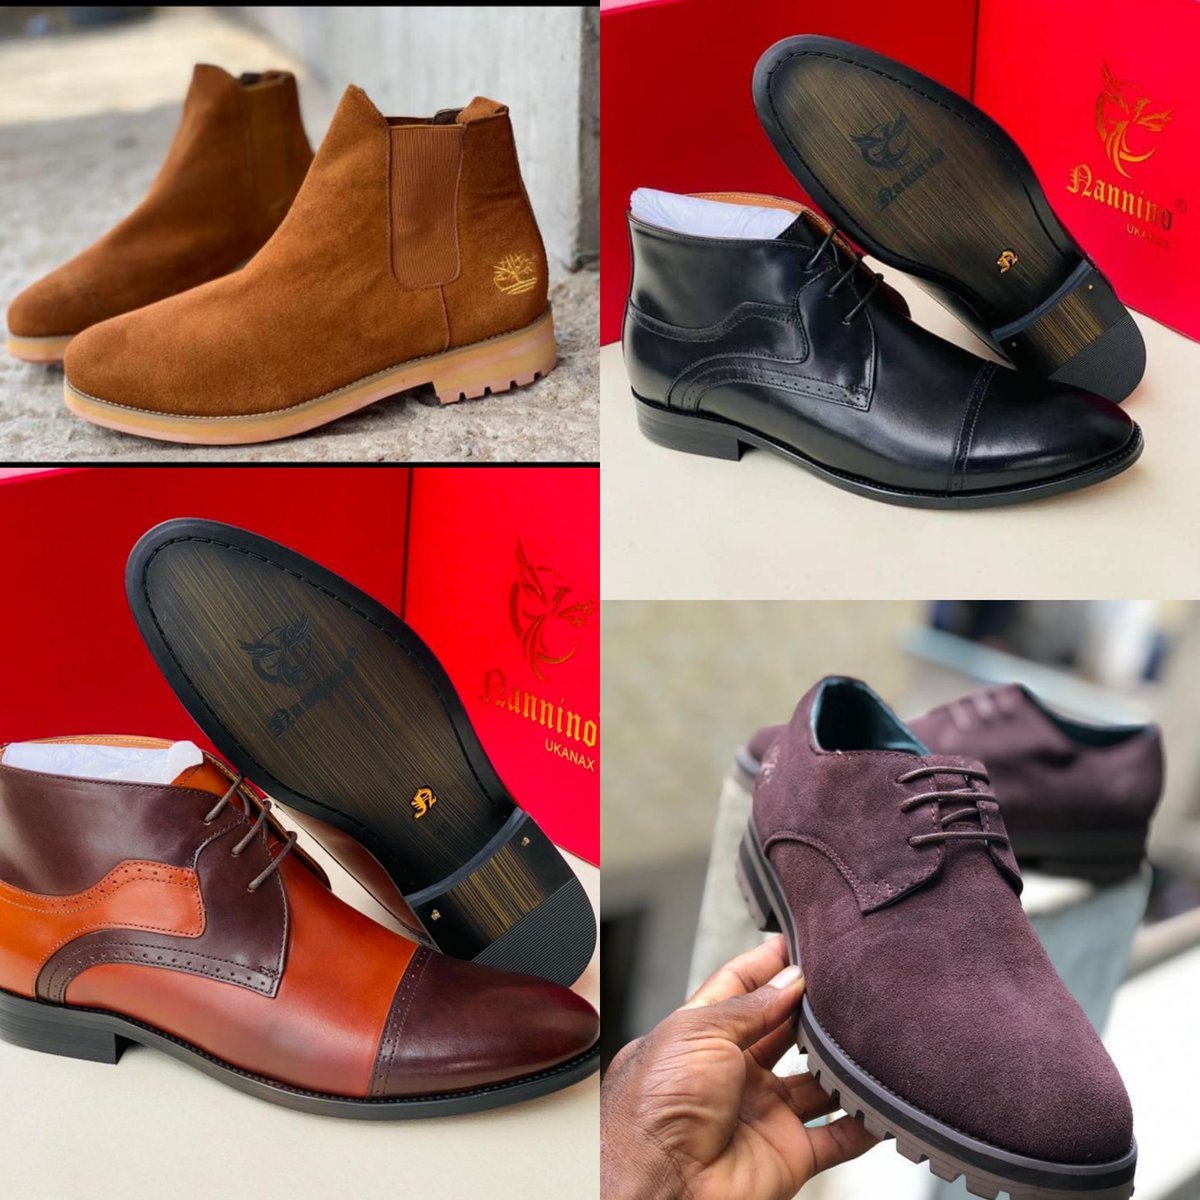 Kindly patronize and help Retweet my business please.🤩🤗❤️

Quality and Affordable 
(fresh in Box) 🎁

To order, send a DM or WhatsApp 0554820942

#FixTheCountryNow #Shattawale #WhatsApp #ShowbizAgenda #sarkodie #GhanaIsBeingFixed #GOGALBUM #stonebwoy